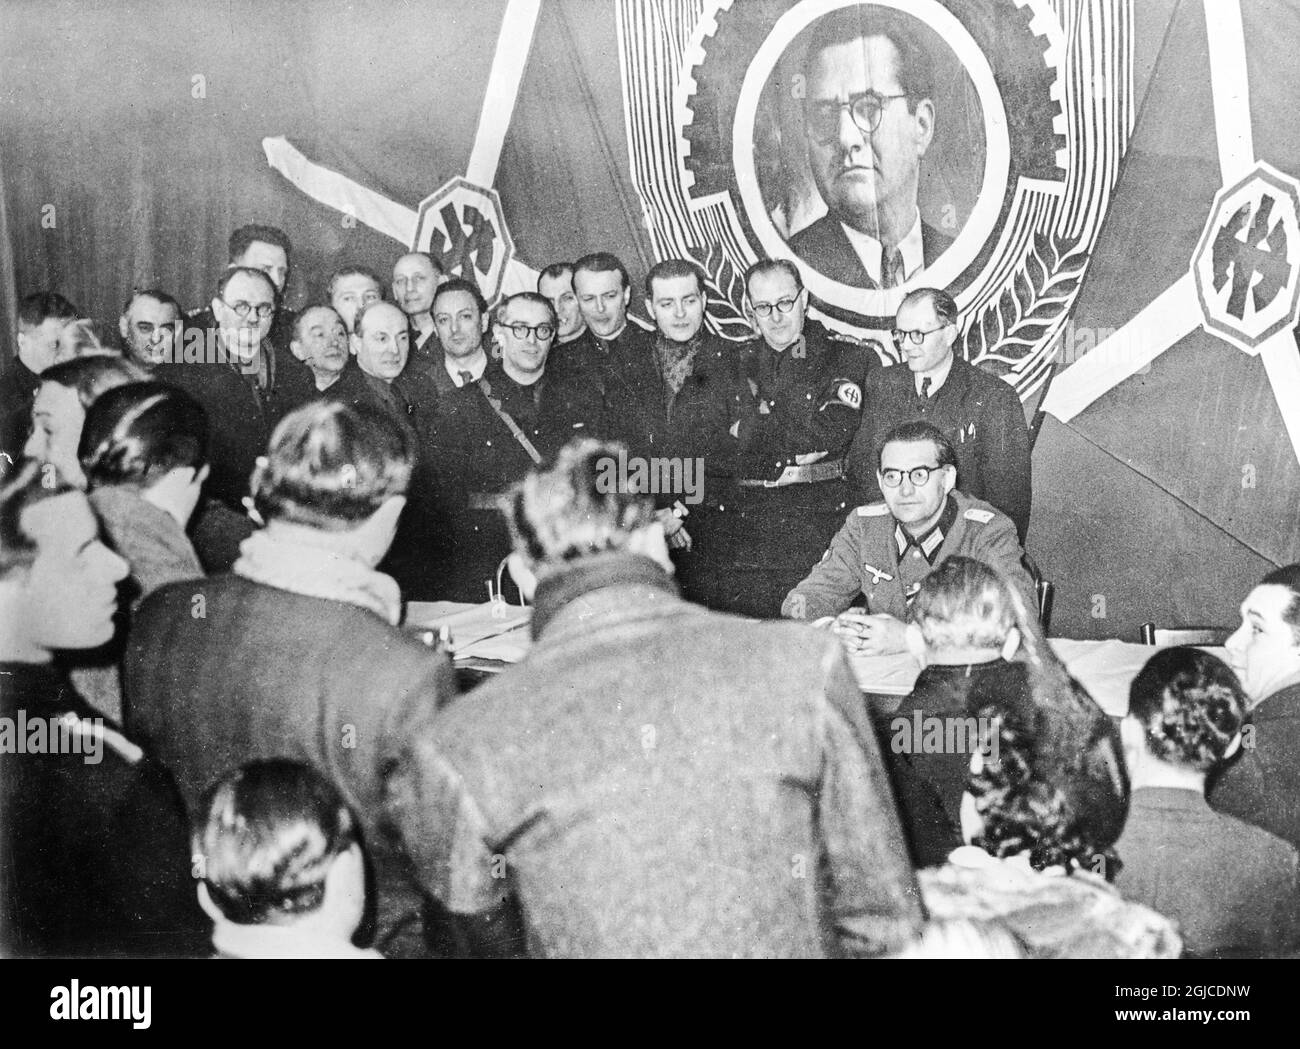 VICHY FRANCE 1940-1944 Jacques Dorriot, leader of the French People's Party and Lieutenant in the French Legion in Vichy France, at a meeting with party members, during the occupation of the rest of France in the Second World War. Photo: Pressens Bild / Orbis / Kod: 190  Stock Photo